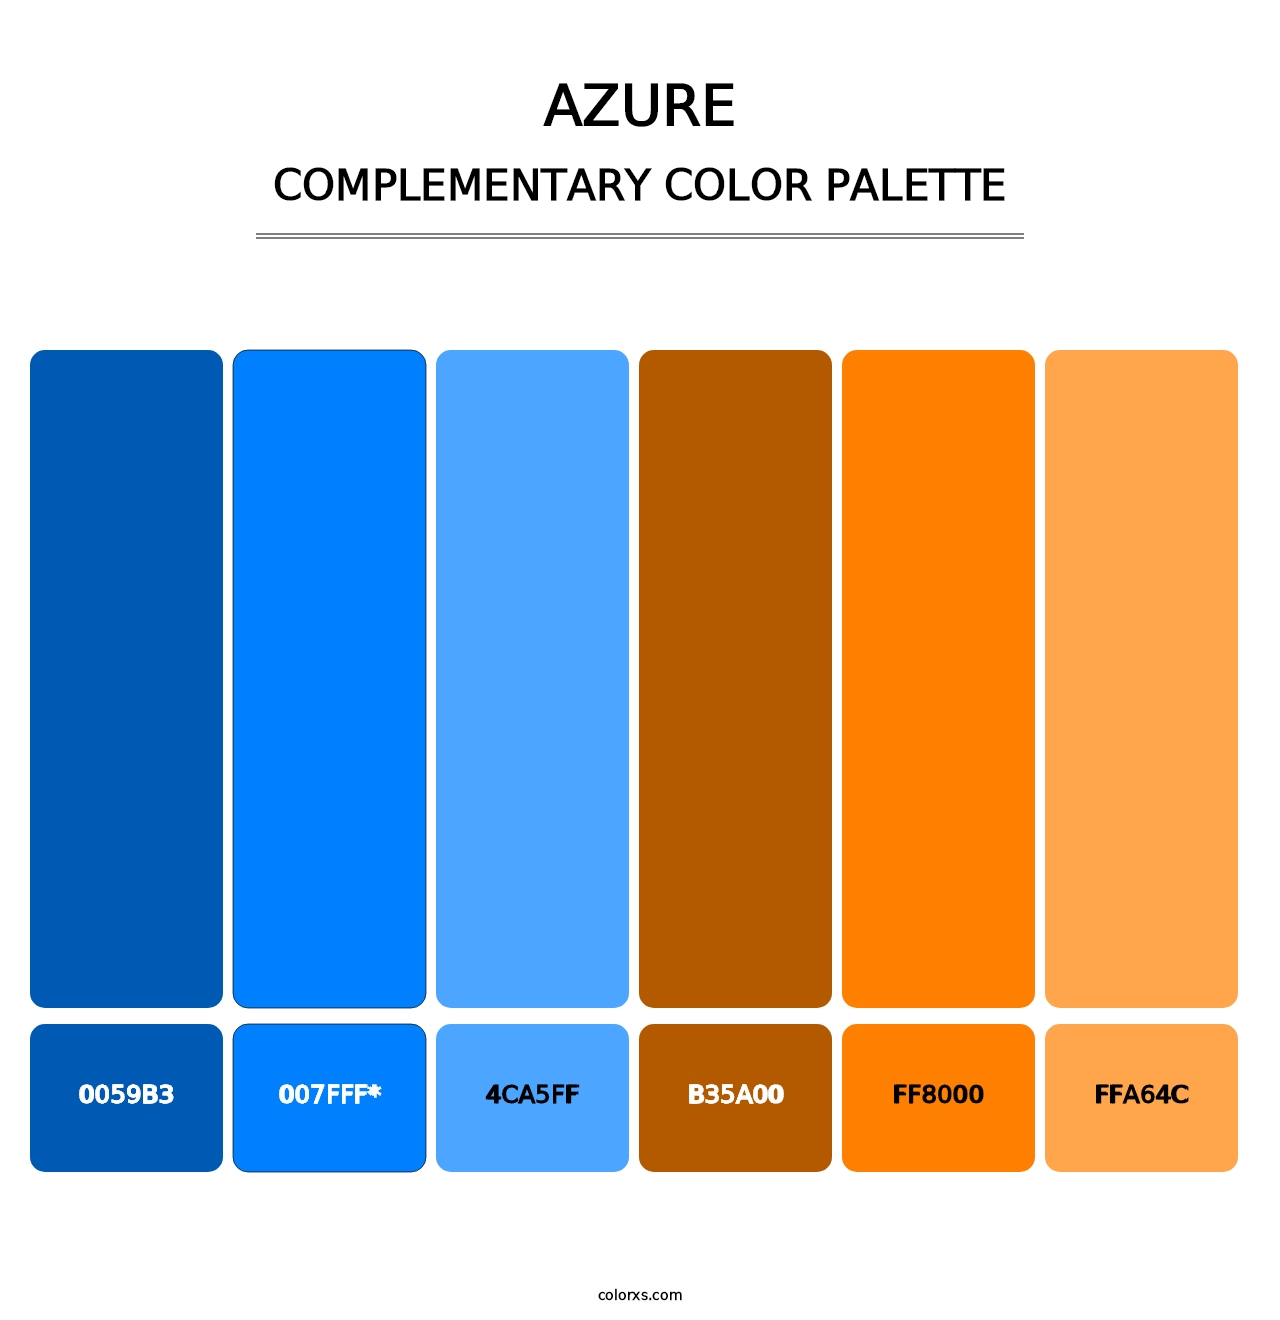 Azure - Complementary Color Palette